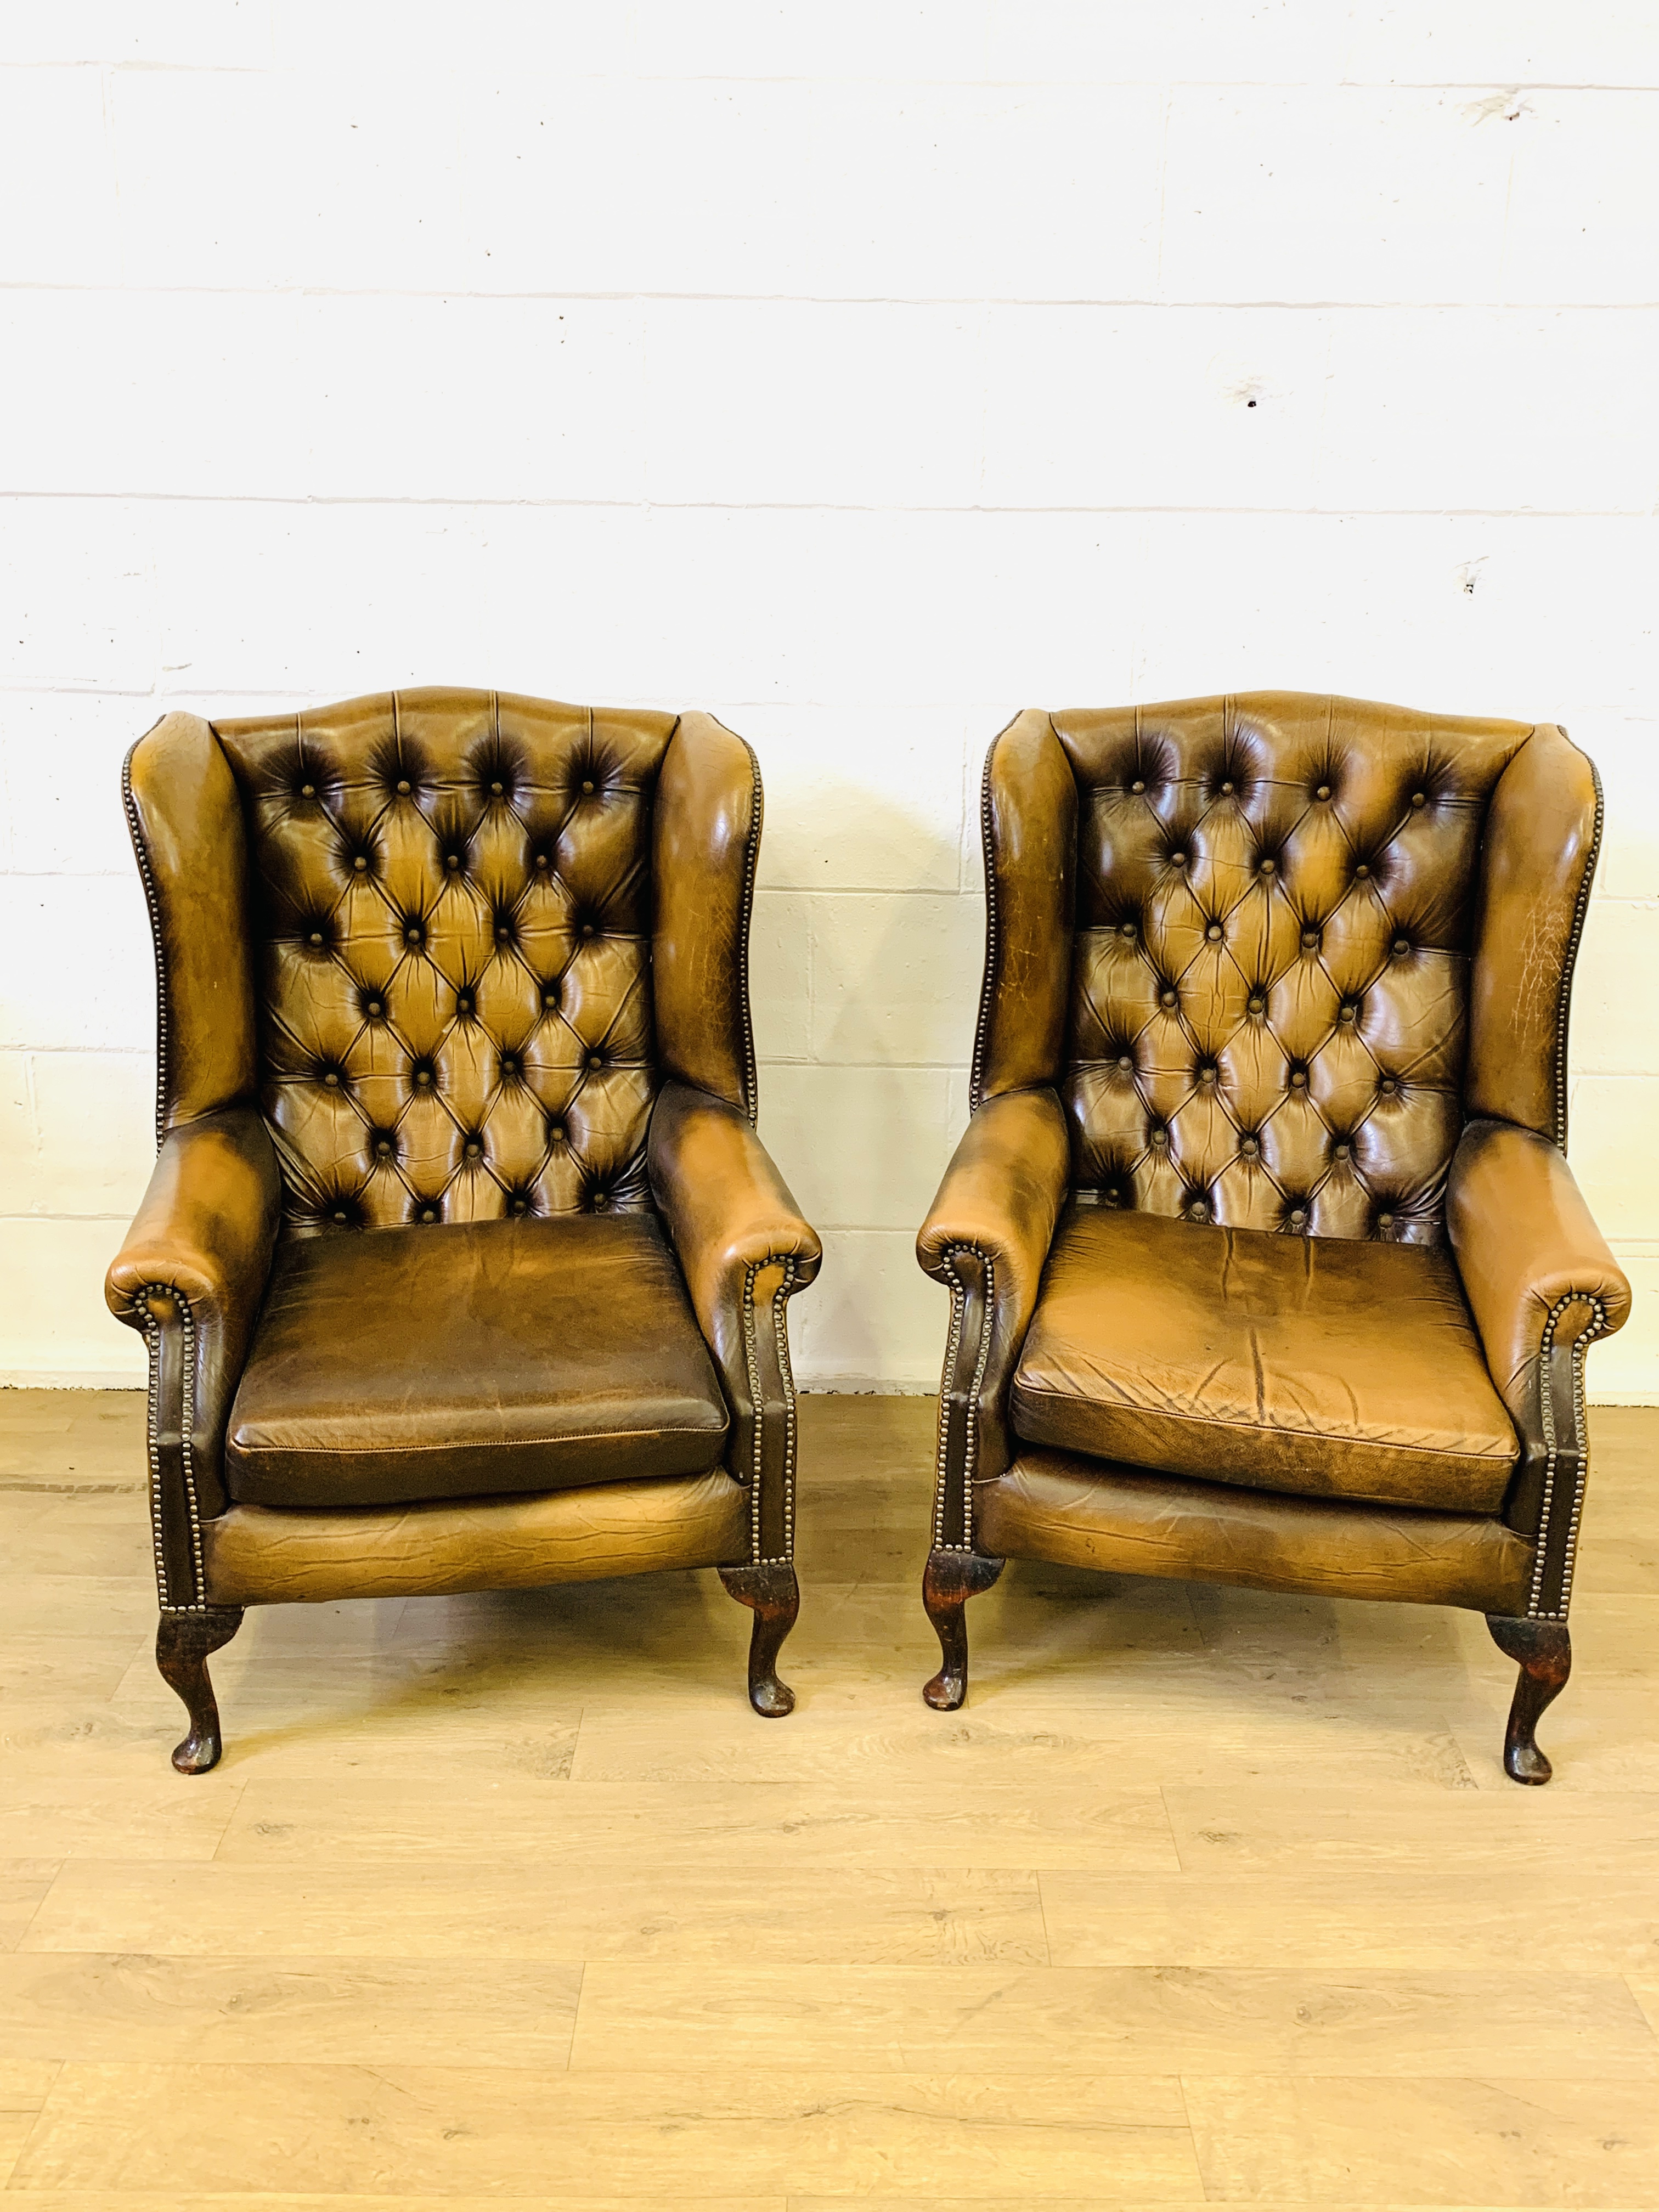 Two leather style armchairs